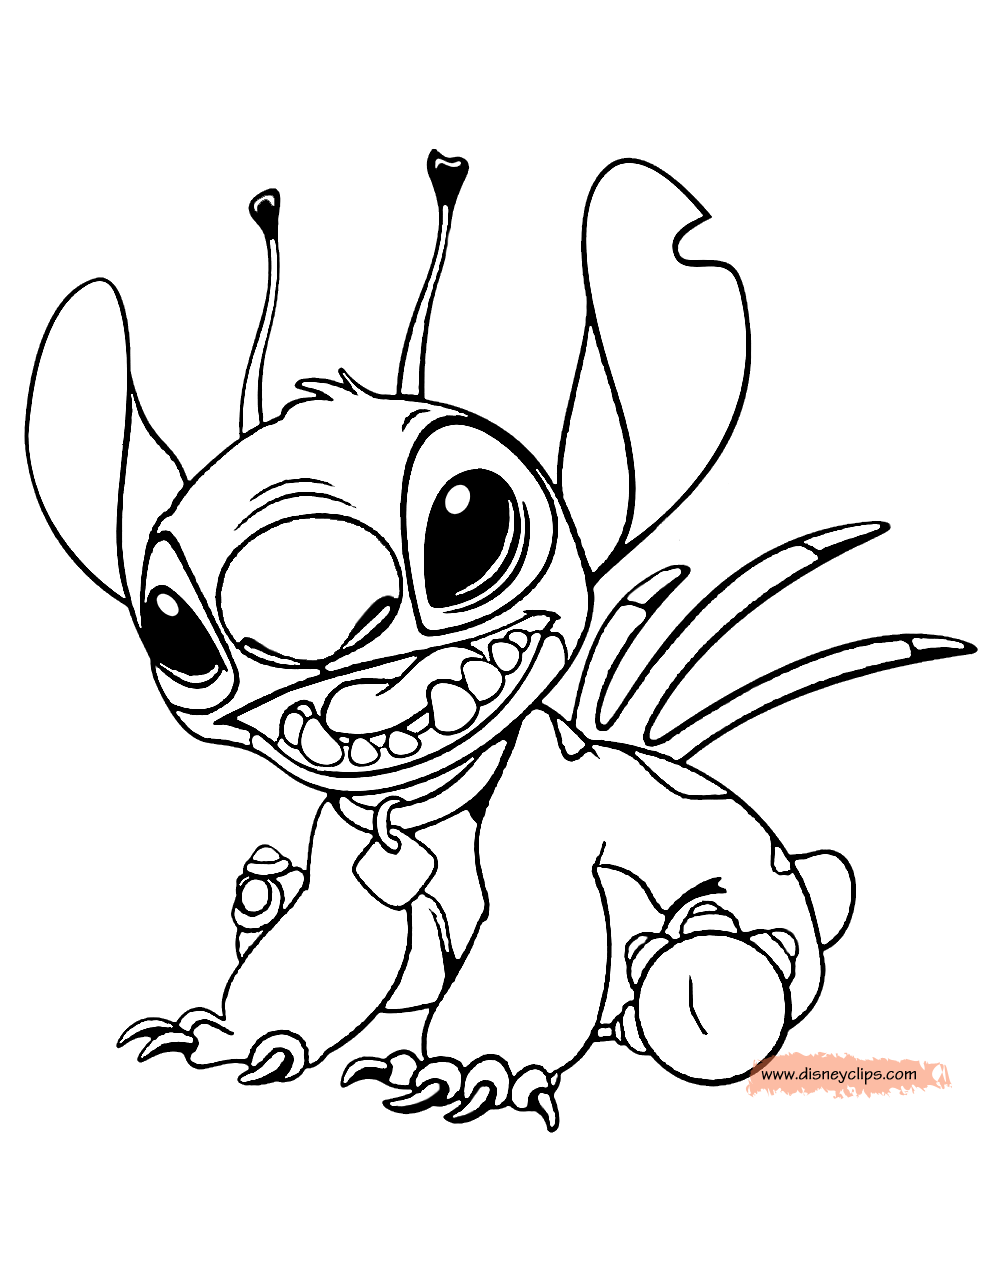 Lilo and Stitch Printable Coloring Pages   Disney Coloring Book